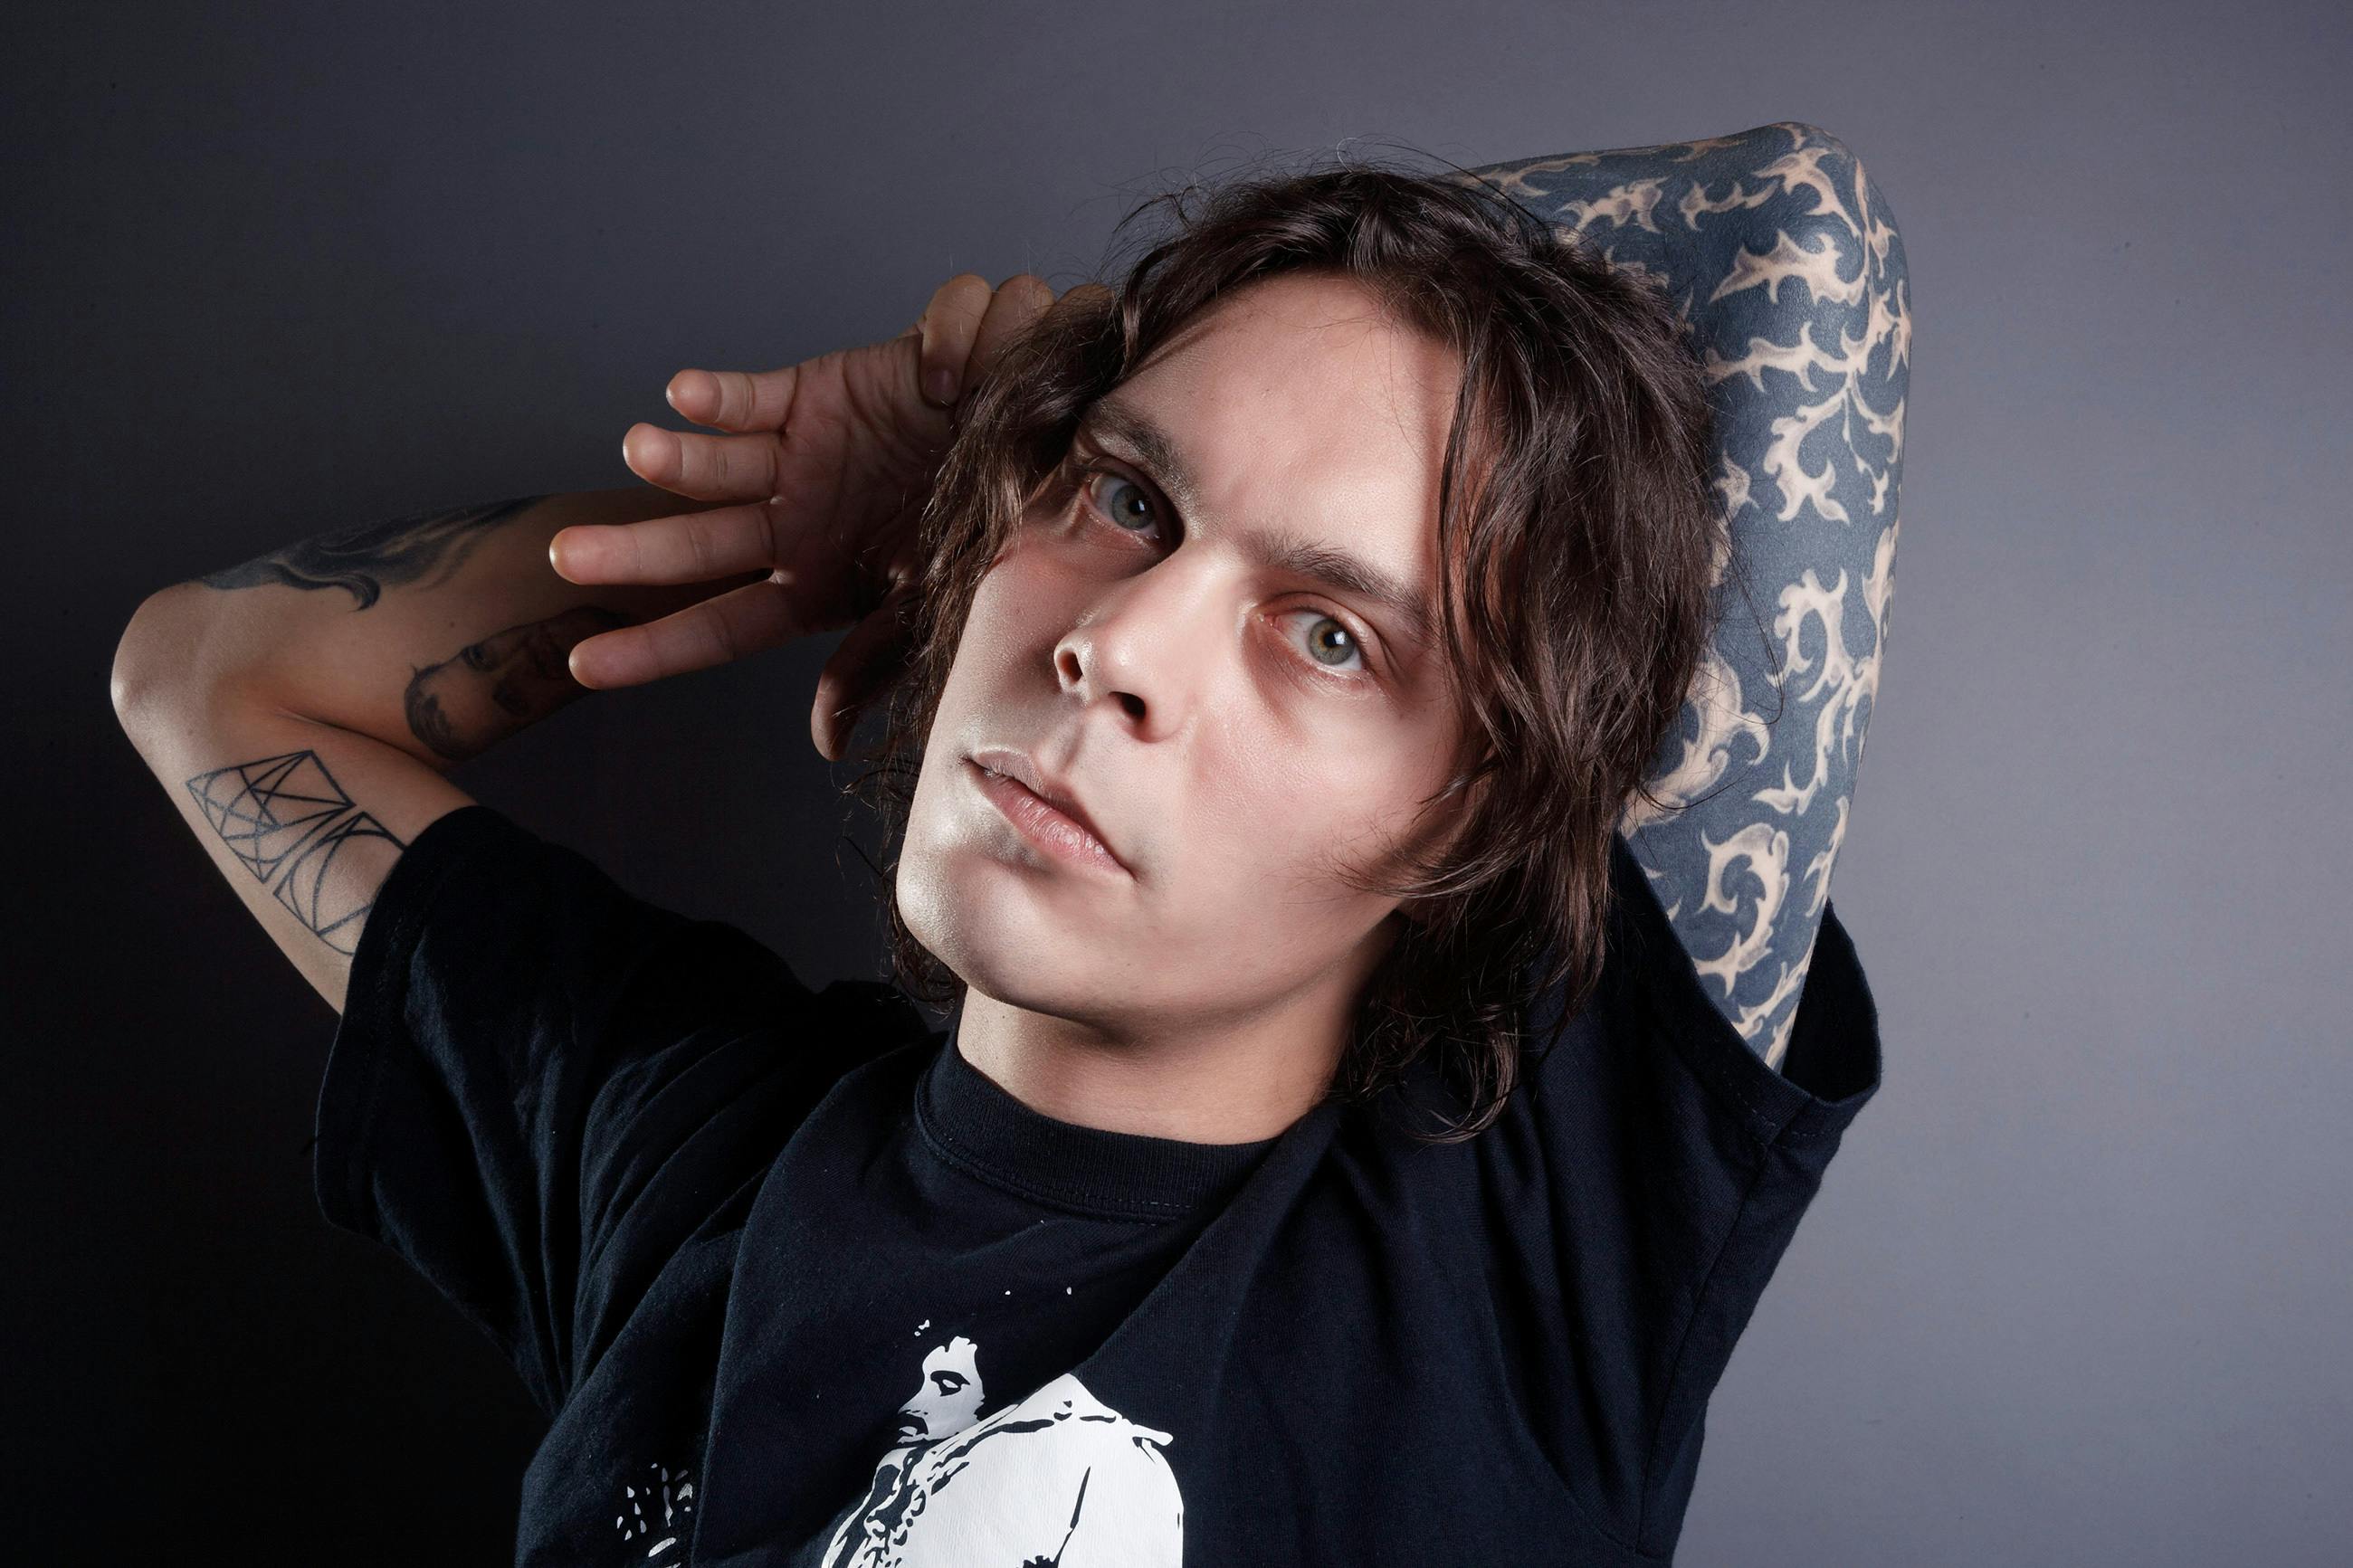 HIM's Ville Valo Releases New EP, Gothica Fennica Vol. 1